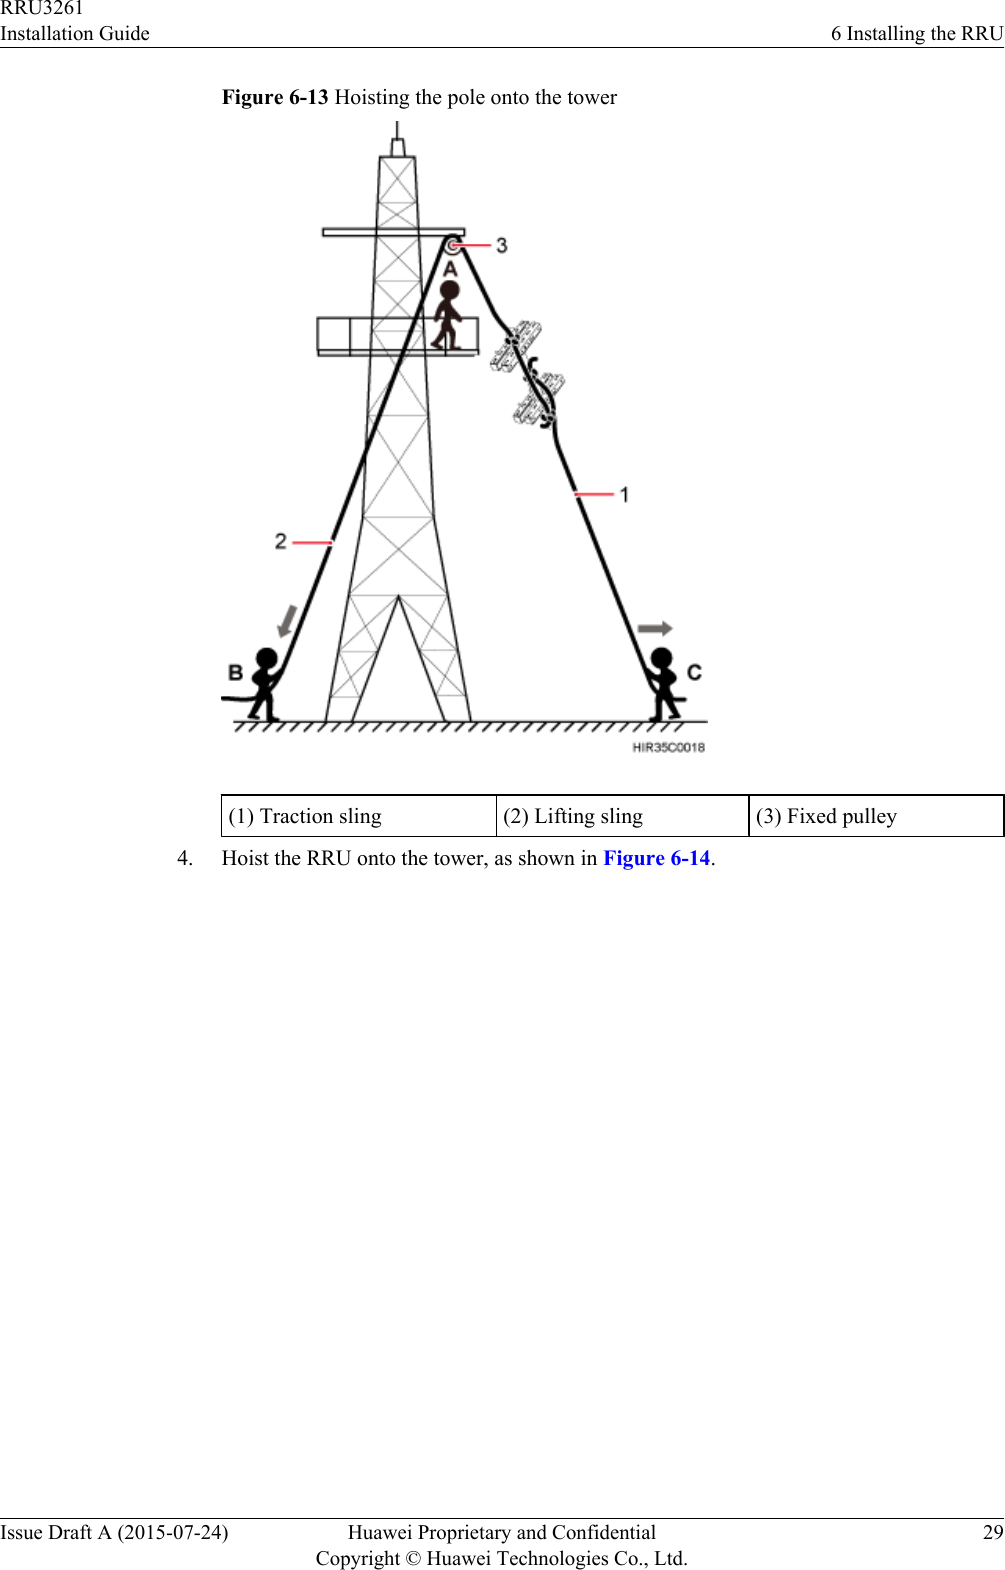 Figure 6-13 Hoisting the pole onto the tower(1) Traction sling (2) Lifting sling (3) Fixed pulley4. Hoist the RRU onto the tower, as shown in Figure 6-14.RRU3261Installation Guide 6 Installing the RRUIssue Draft A (2015-07-24) Huawei Proprietary and ConfidentialCopyright © Huawei Technologies Co., Ltd.29